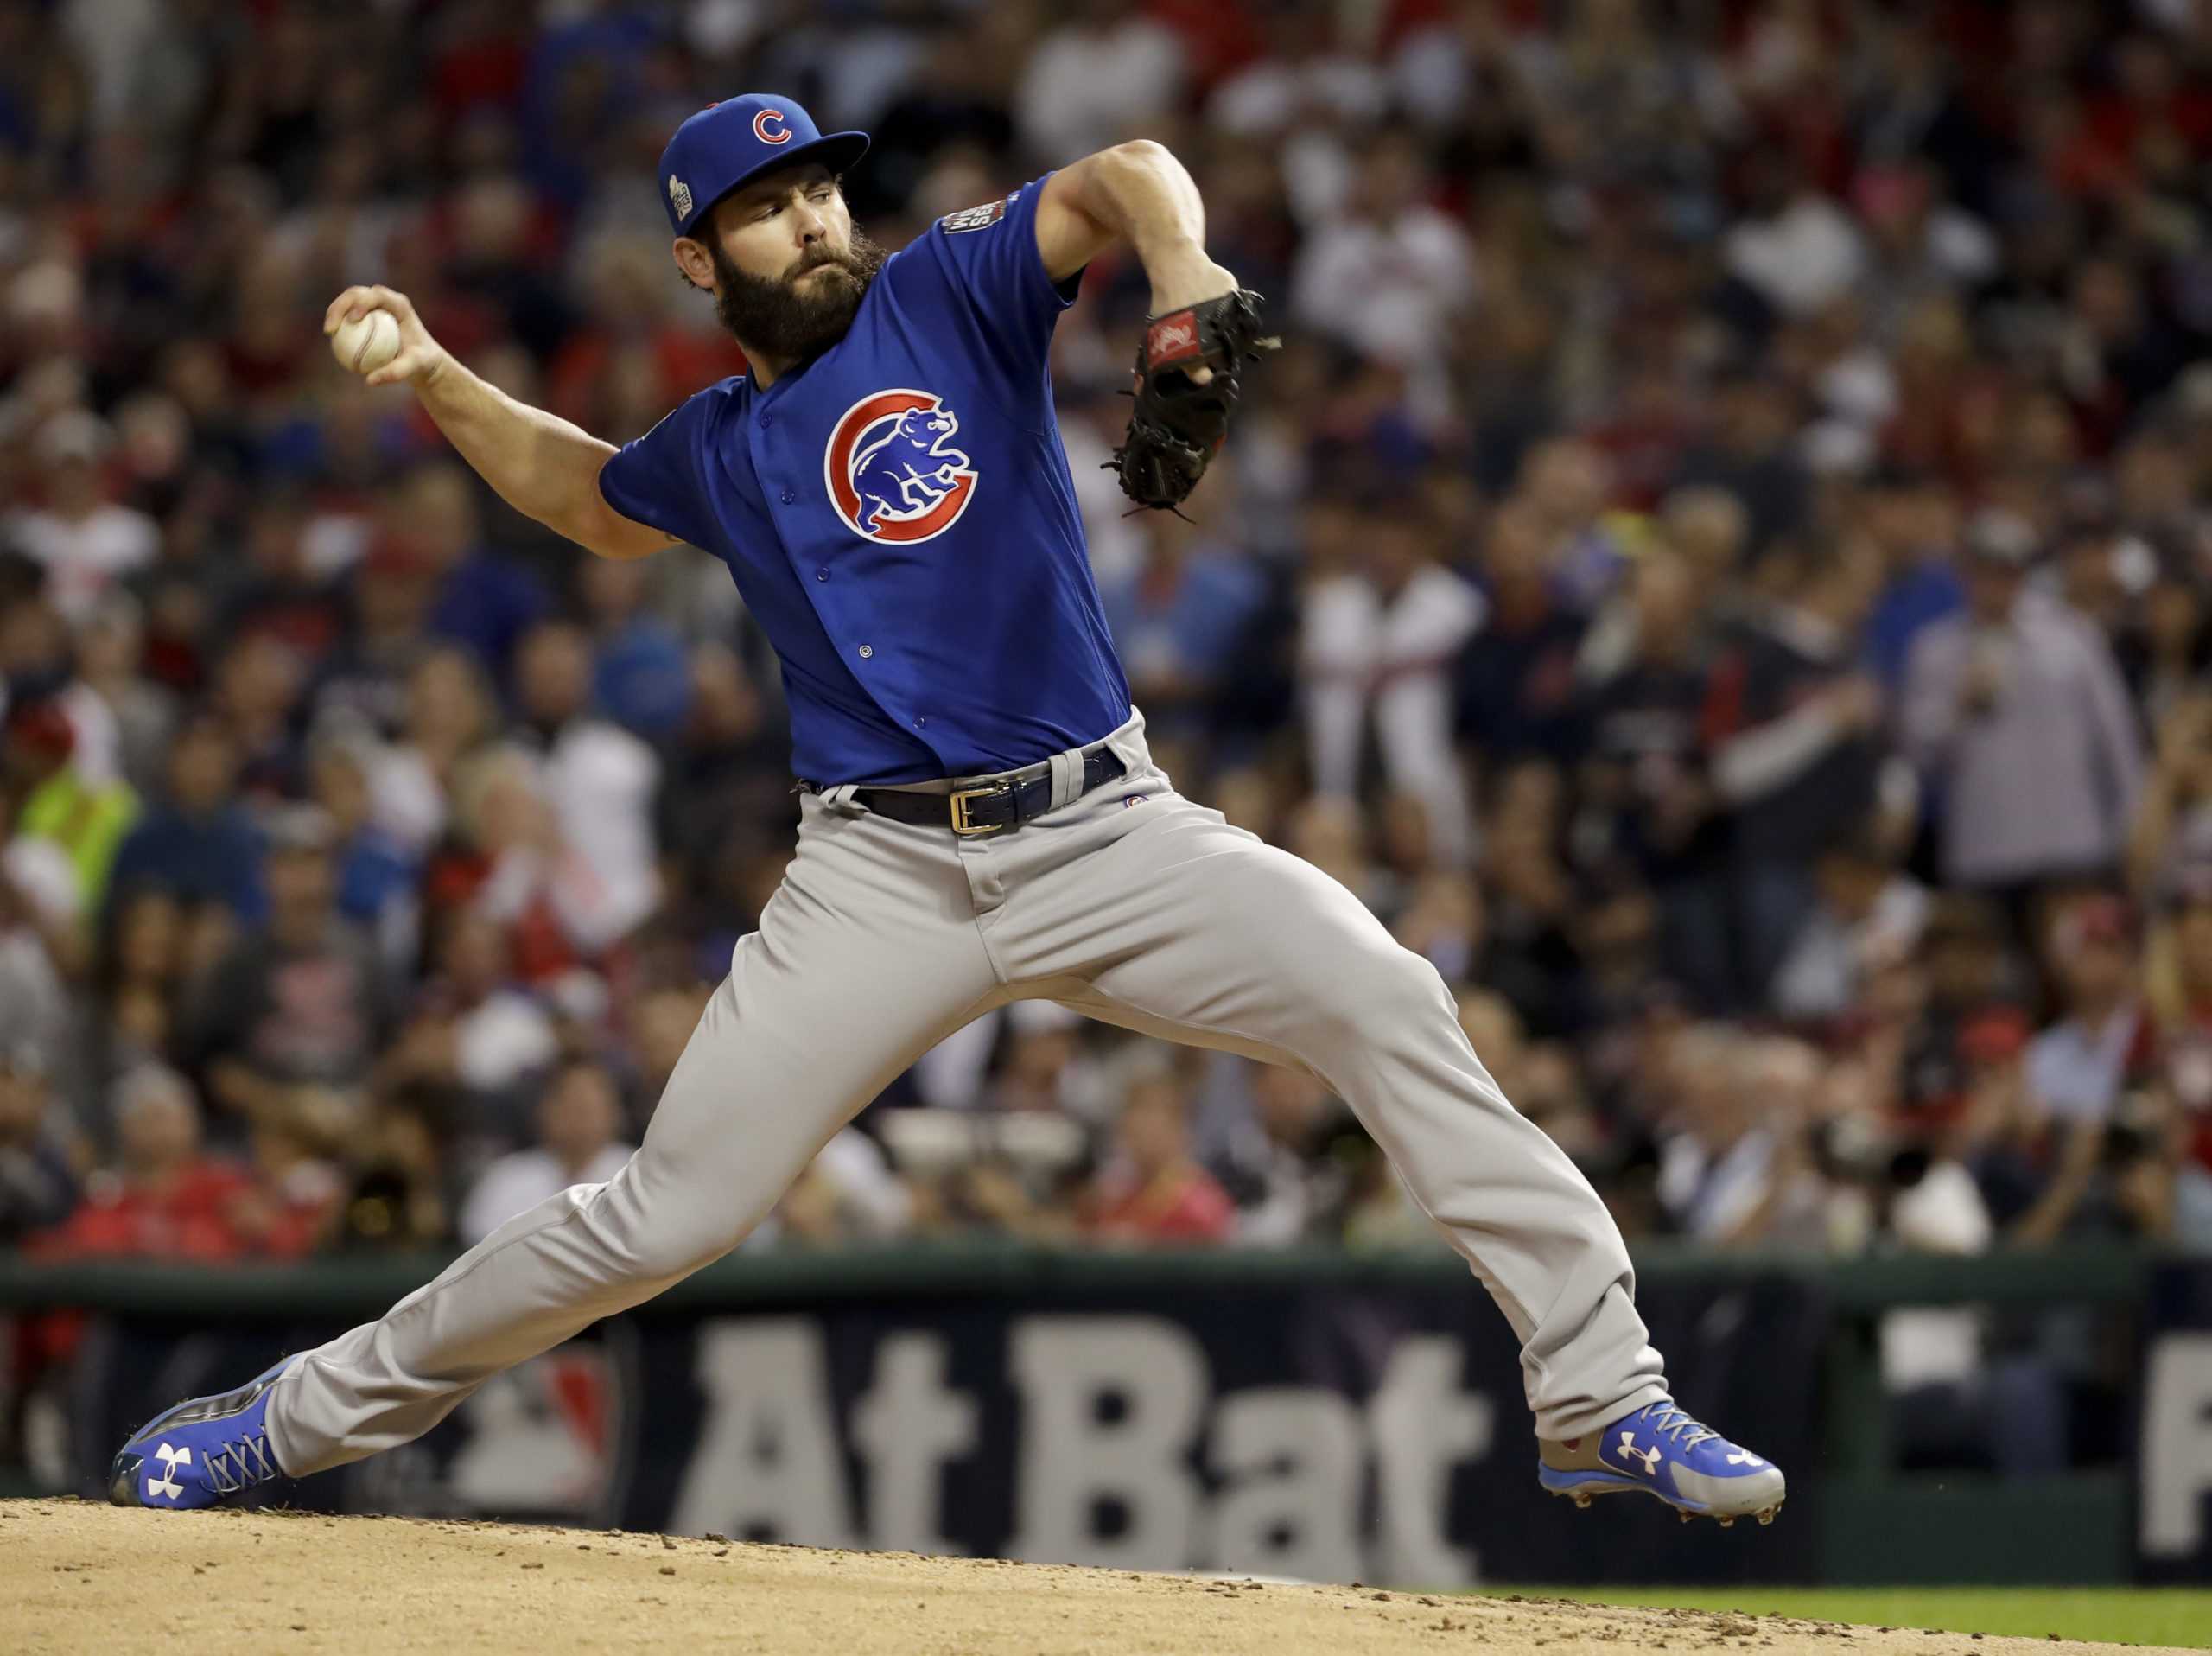 Chicago Cubs starting pitcher Jake Arrieta throws against the Cleveland Indians during the first inning of Game 6 of the Major League Baseball World Series Tuesday, Nov. 1, 2016, in Cleveland. (AP Photo/Matt Slocum)